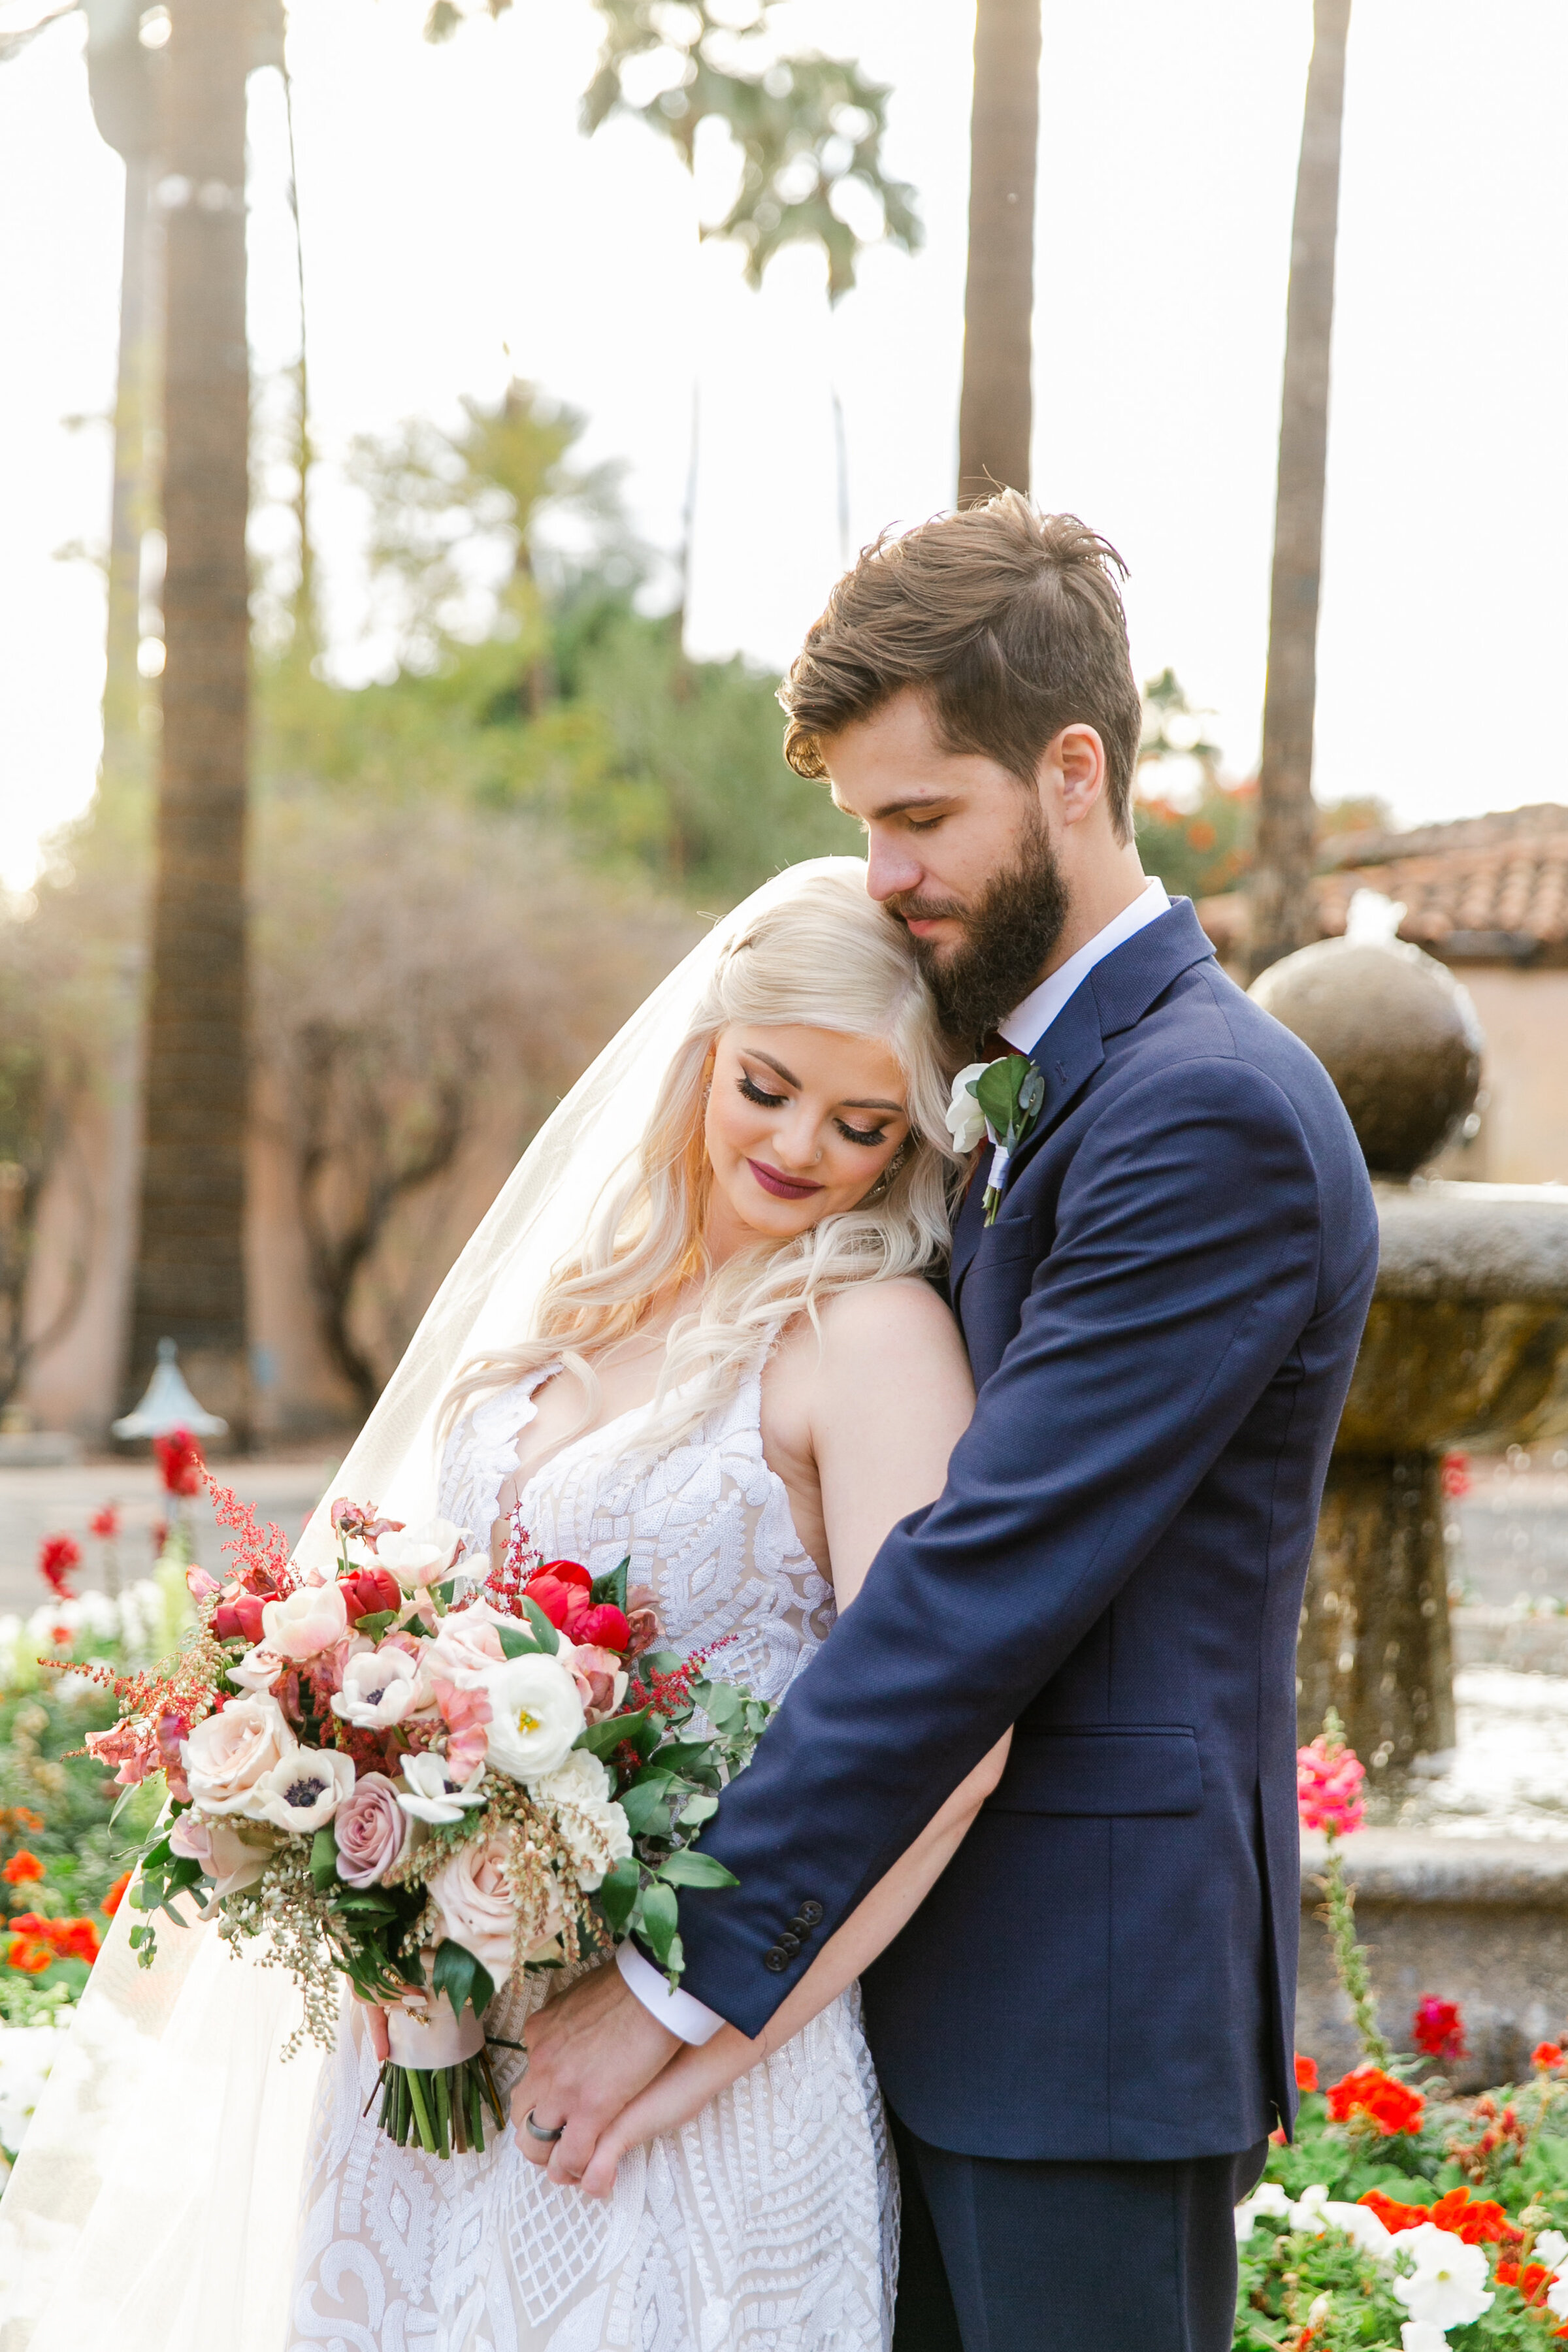 Karlie Colleen Photography - The Royal Palms Wedding - Some Like It Classic - Alex & Sam-544